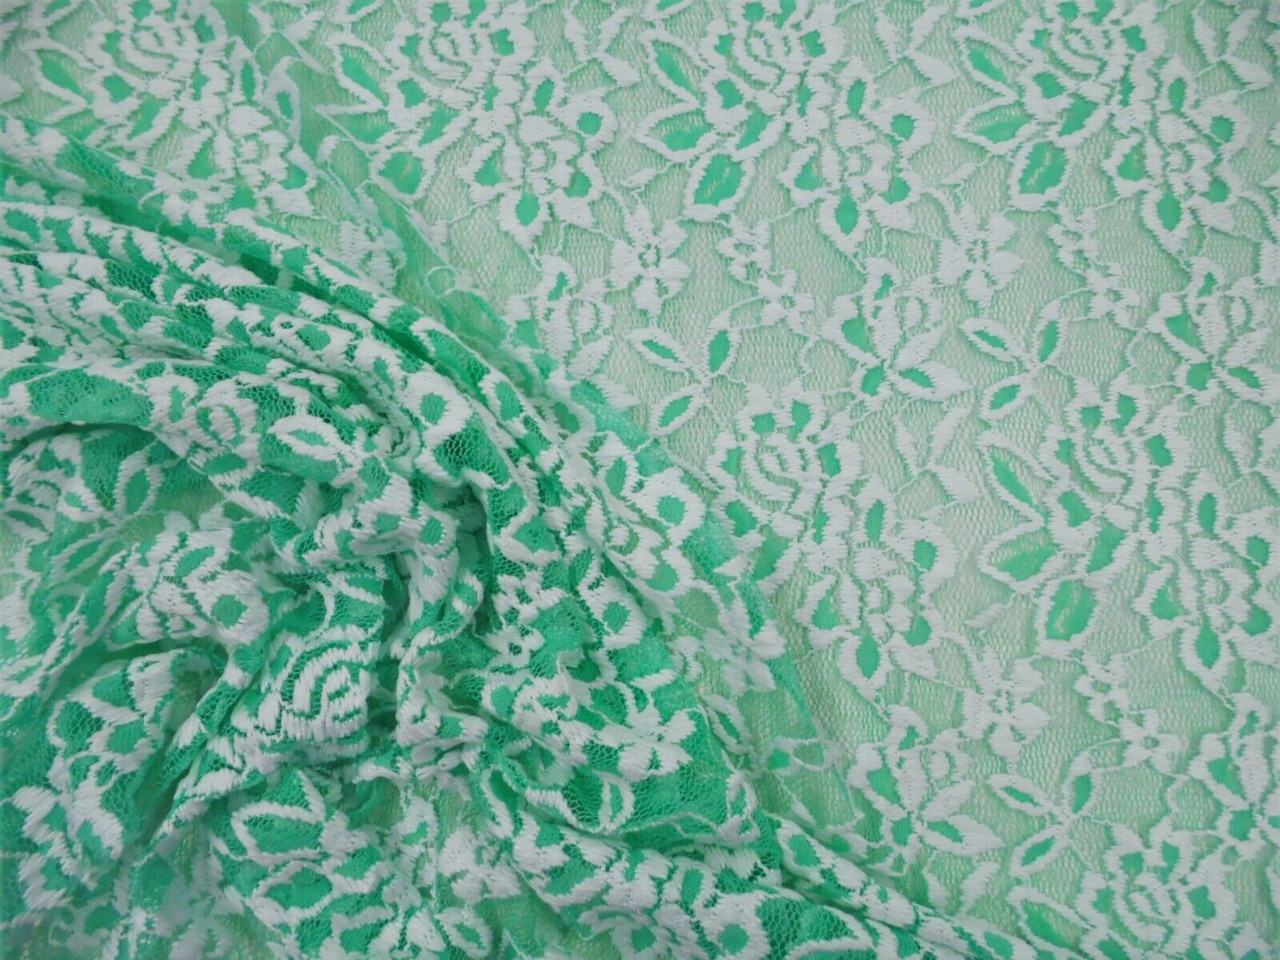 Embroidered Stretch Lace Apparel Fabric Sheer Mint Green White Floral AA421